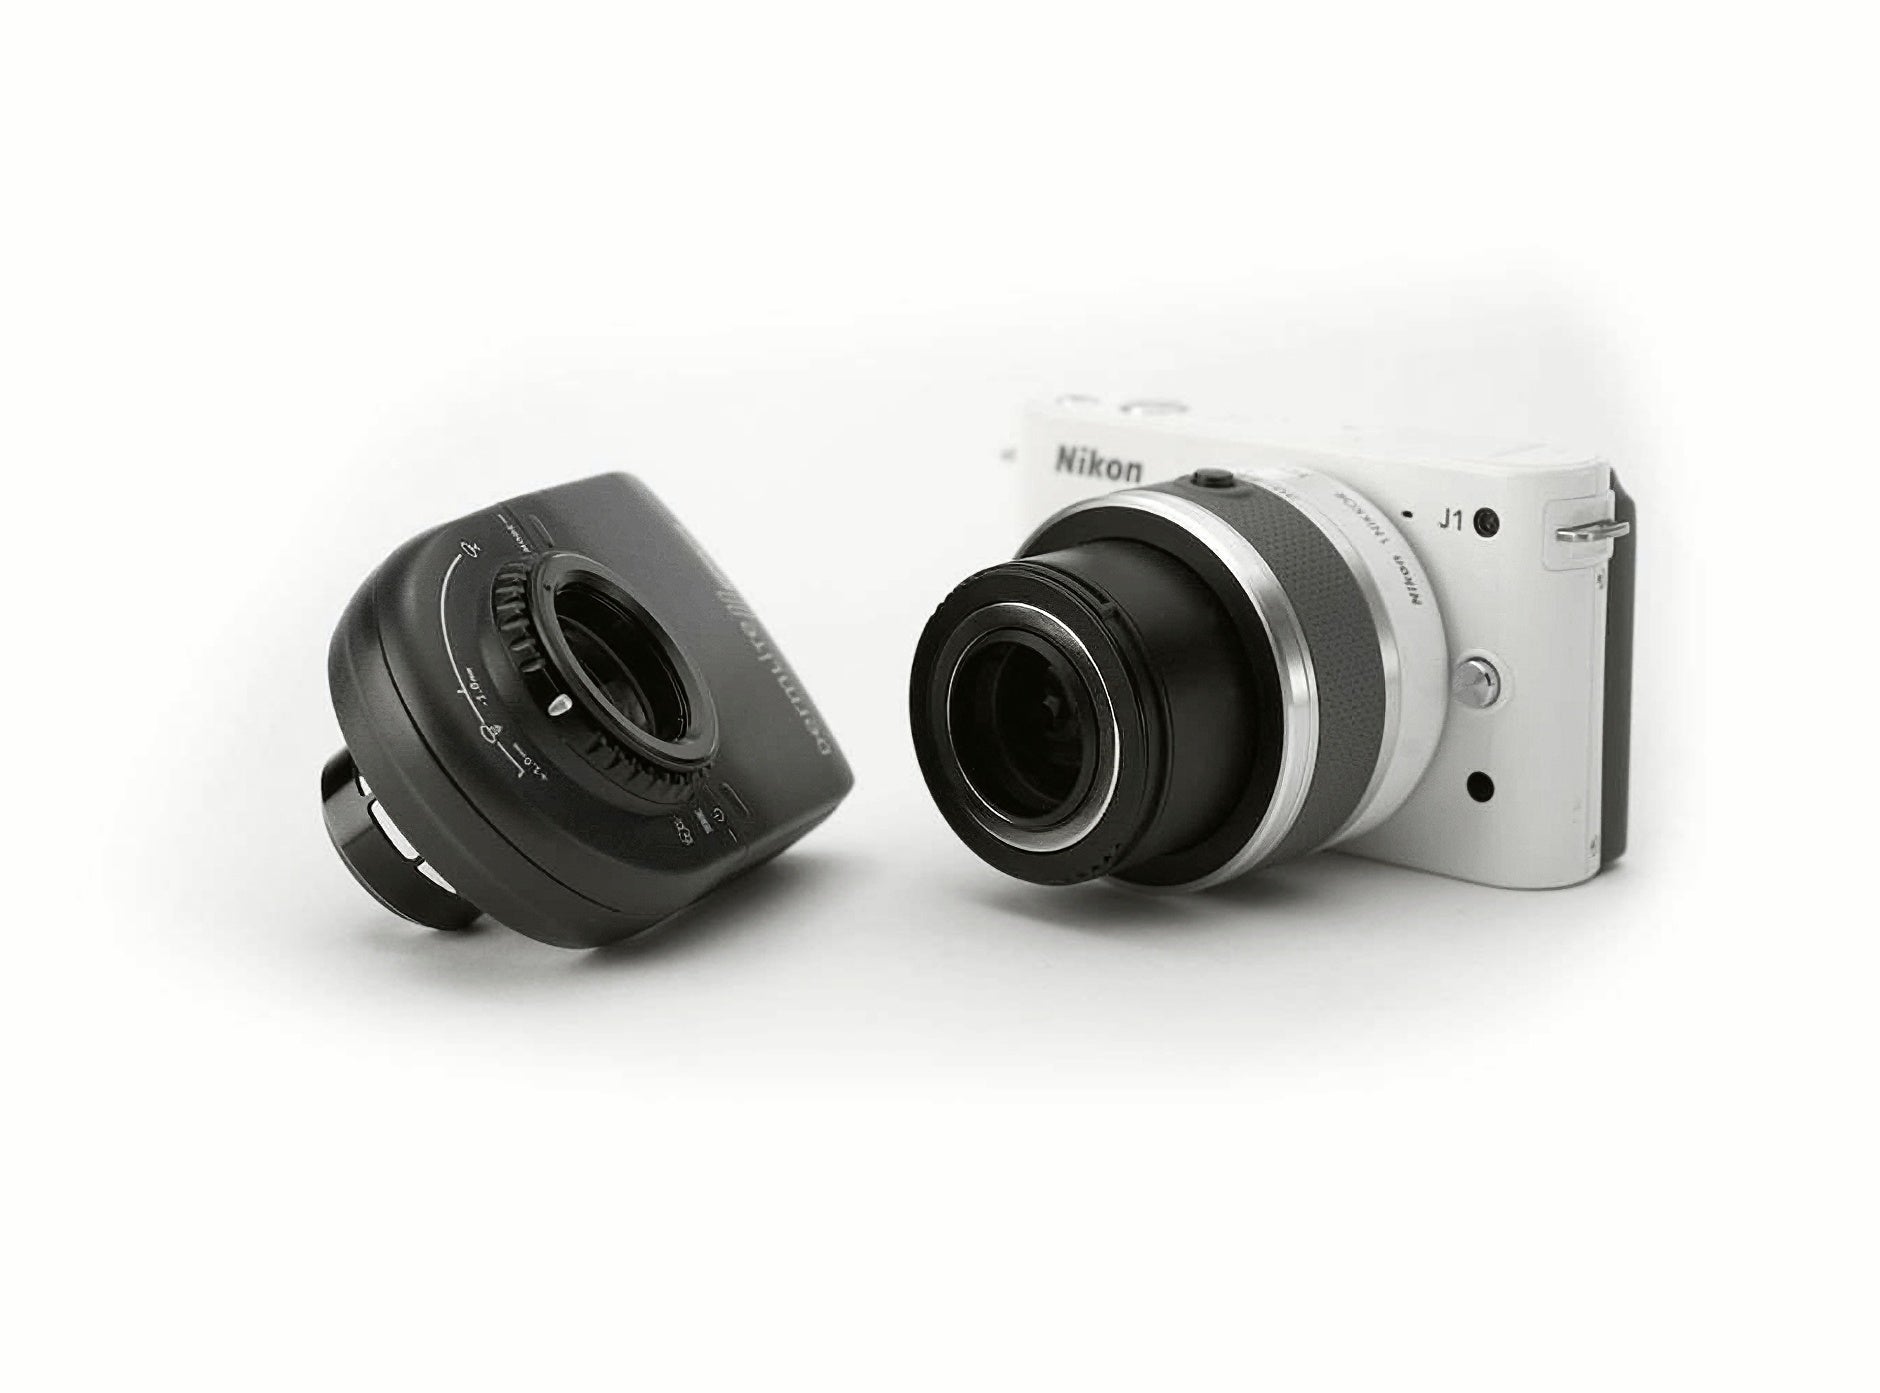 The Nikon d3100 and Nikon d7100 are versatile cameras that can be enhanced with additional accessories such as camera lens and DermLite. Additionally, the MagnetiConnect® Camera Adapter allows for quick and easy.